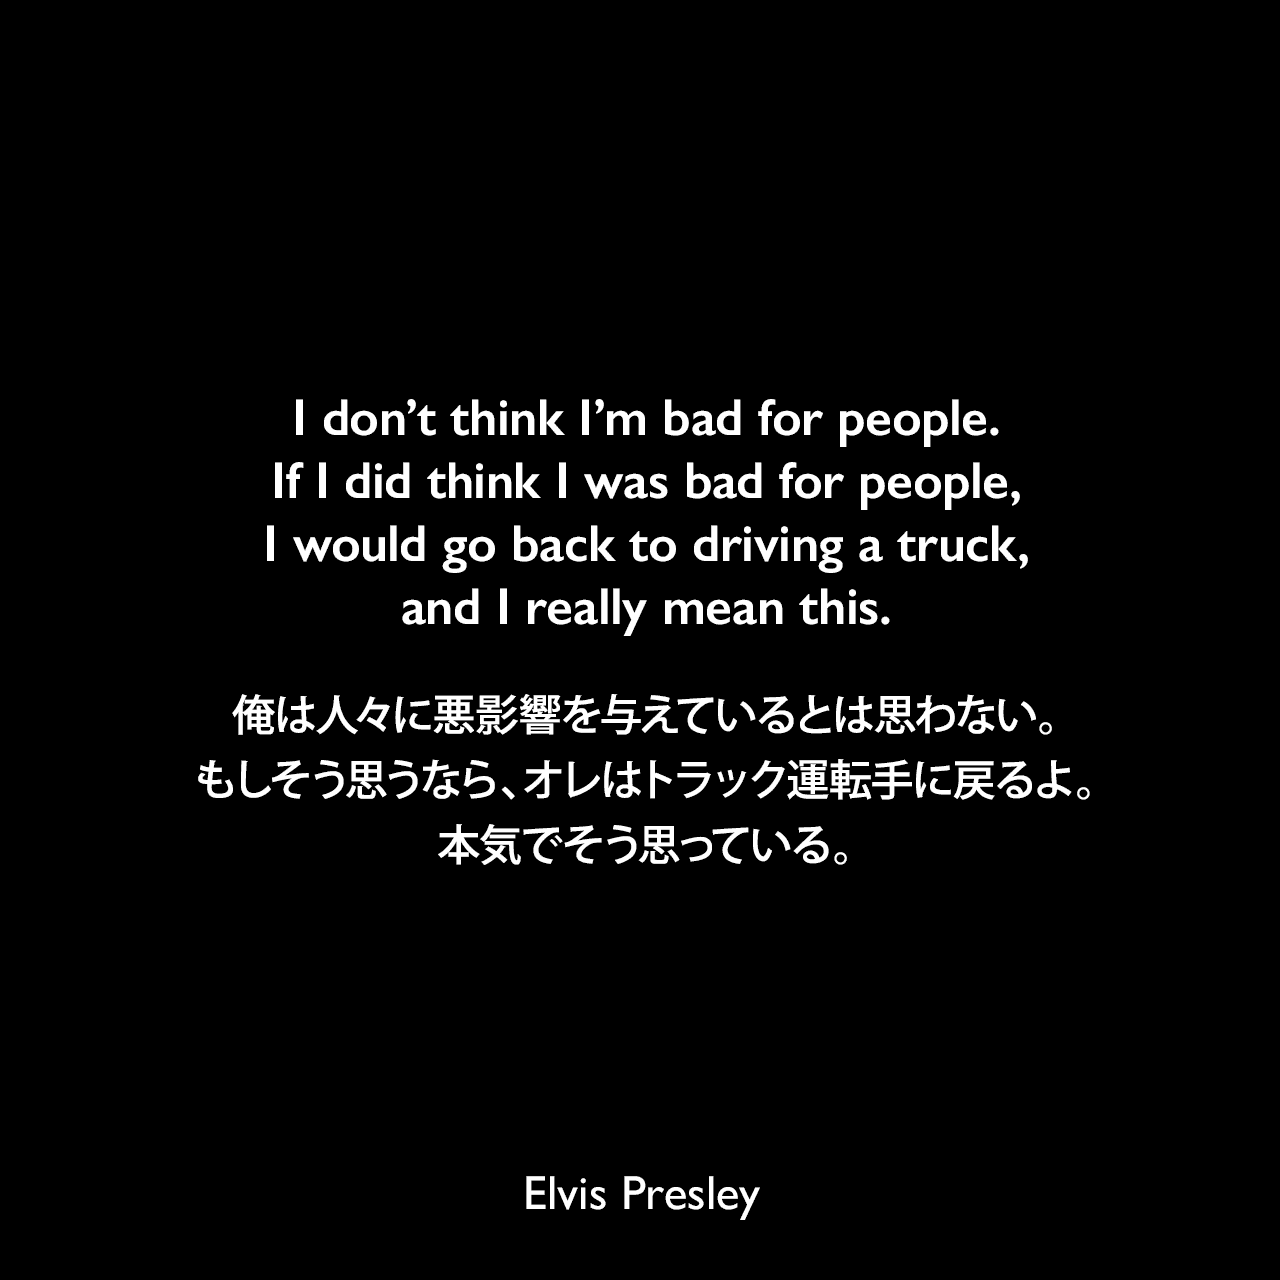 I don’t think I’m bad for people. If I did think I was bad for people, I would go back to driving a truck, and I really mean this.俺は人々に悪影響を与えているとは思わない。もしそう思うなら、オレはトラック運転手に戻るよ。本気でそう思っている。Elvis Presley